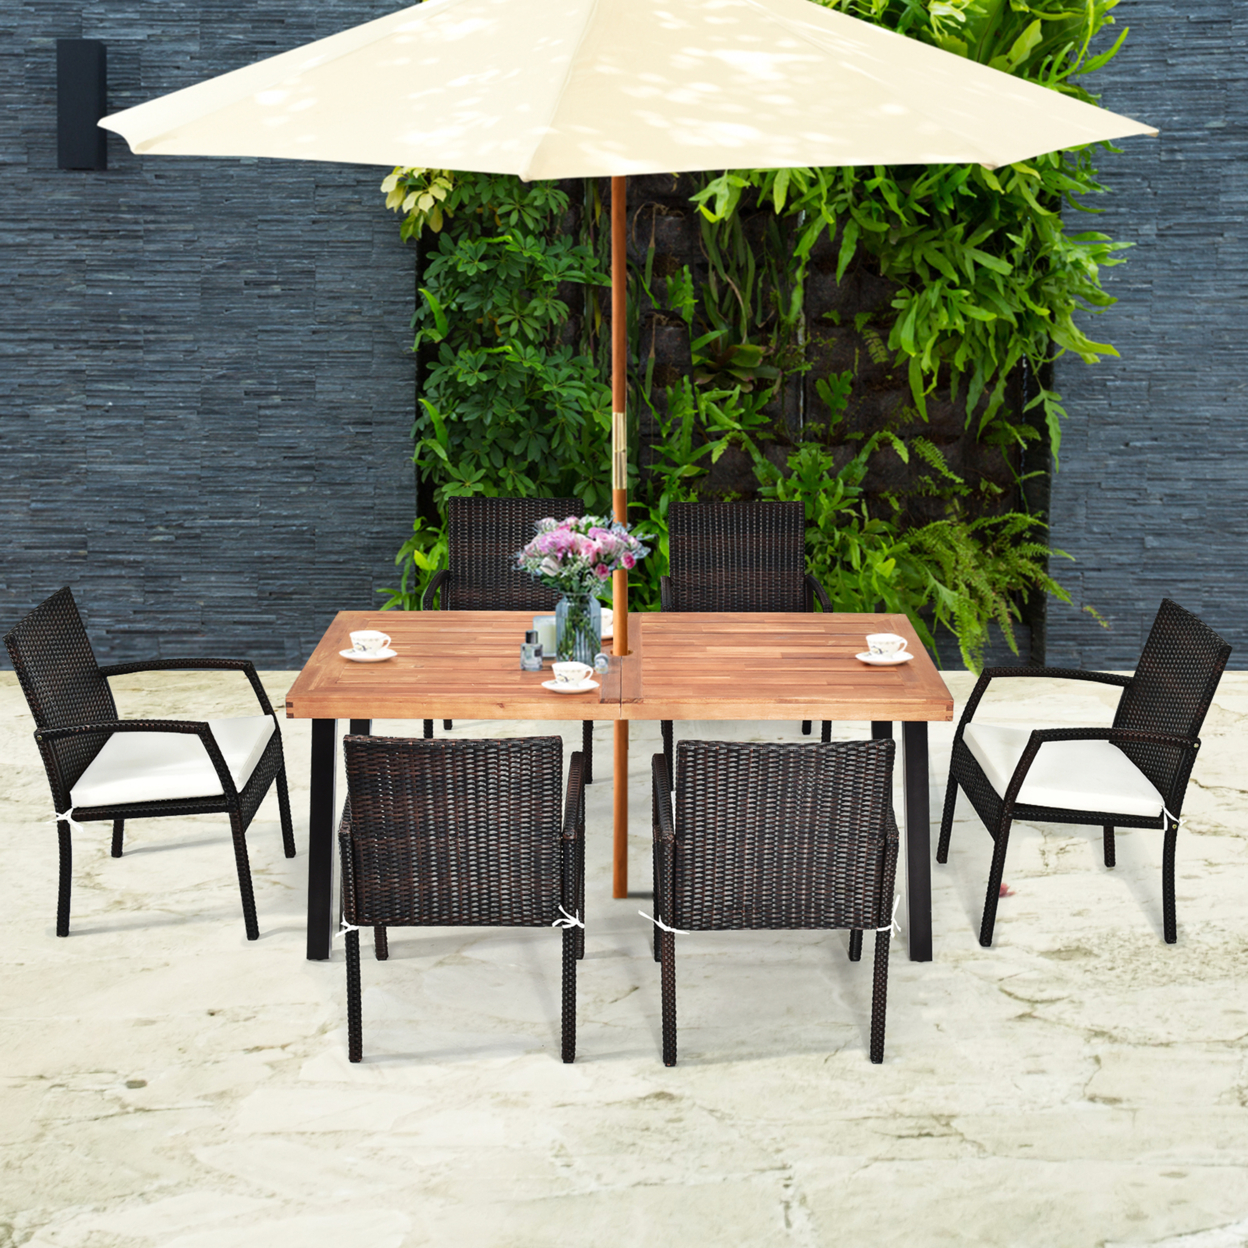 7PCS Patio Rattan Dining Set Wooden Table Top Cushioned Chair Garden